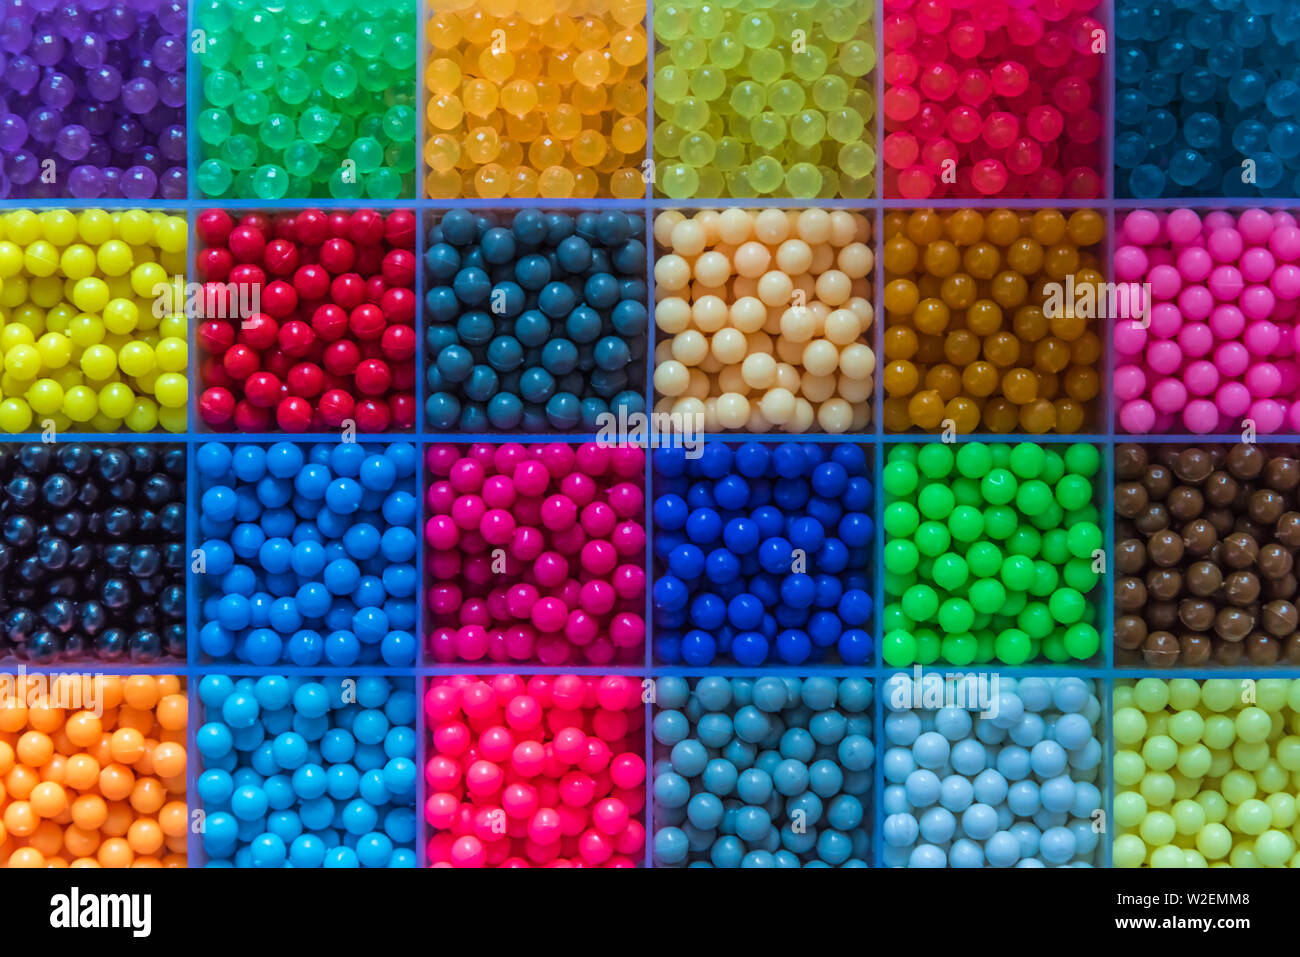 Many small beads are arranged in the box Stock Photo